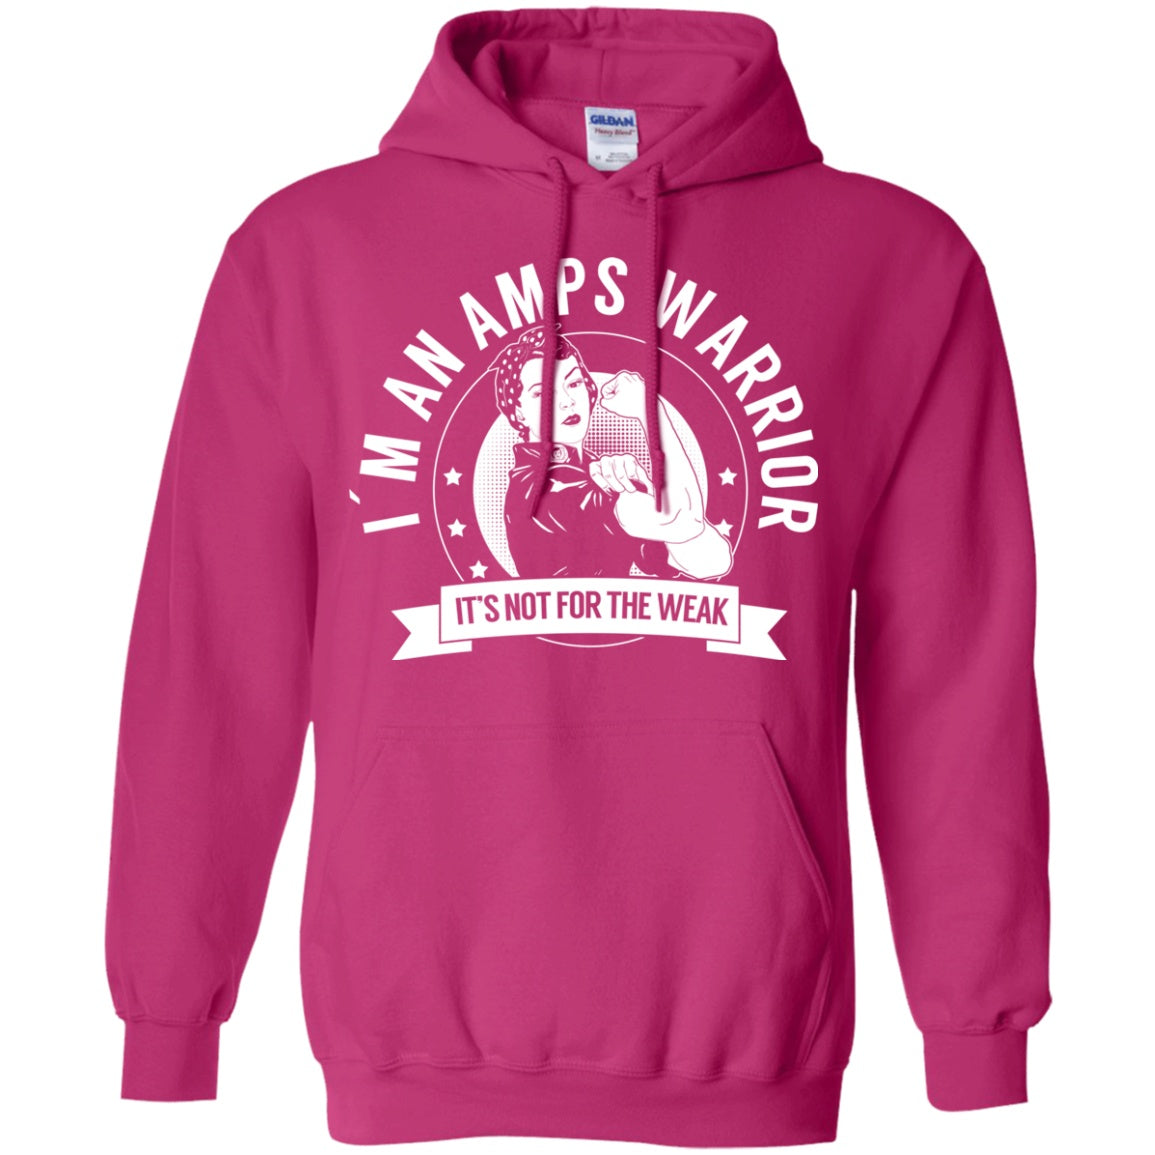 Amplified Musculoskeletal Pain Syndrome - AMPS Warrior NFTW Pullover Hoodie 8 oz. - The Unchargeables